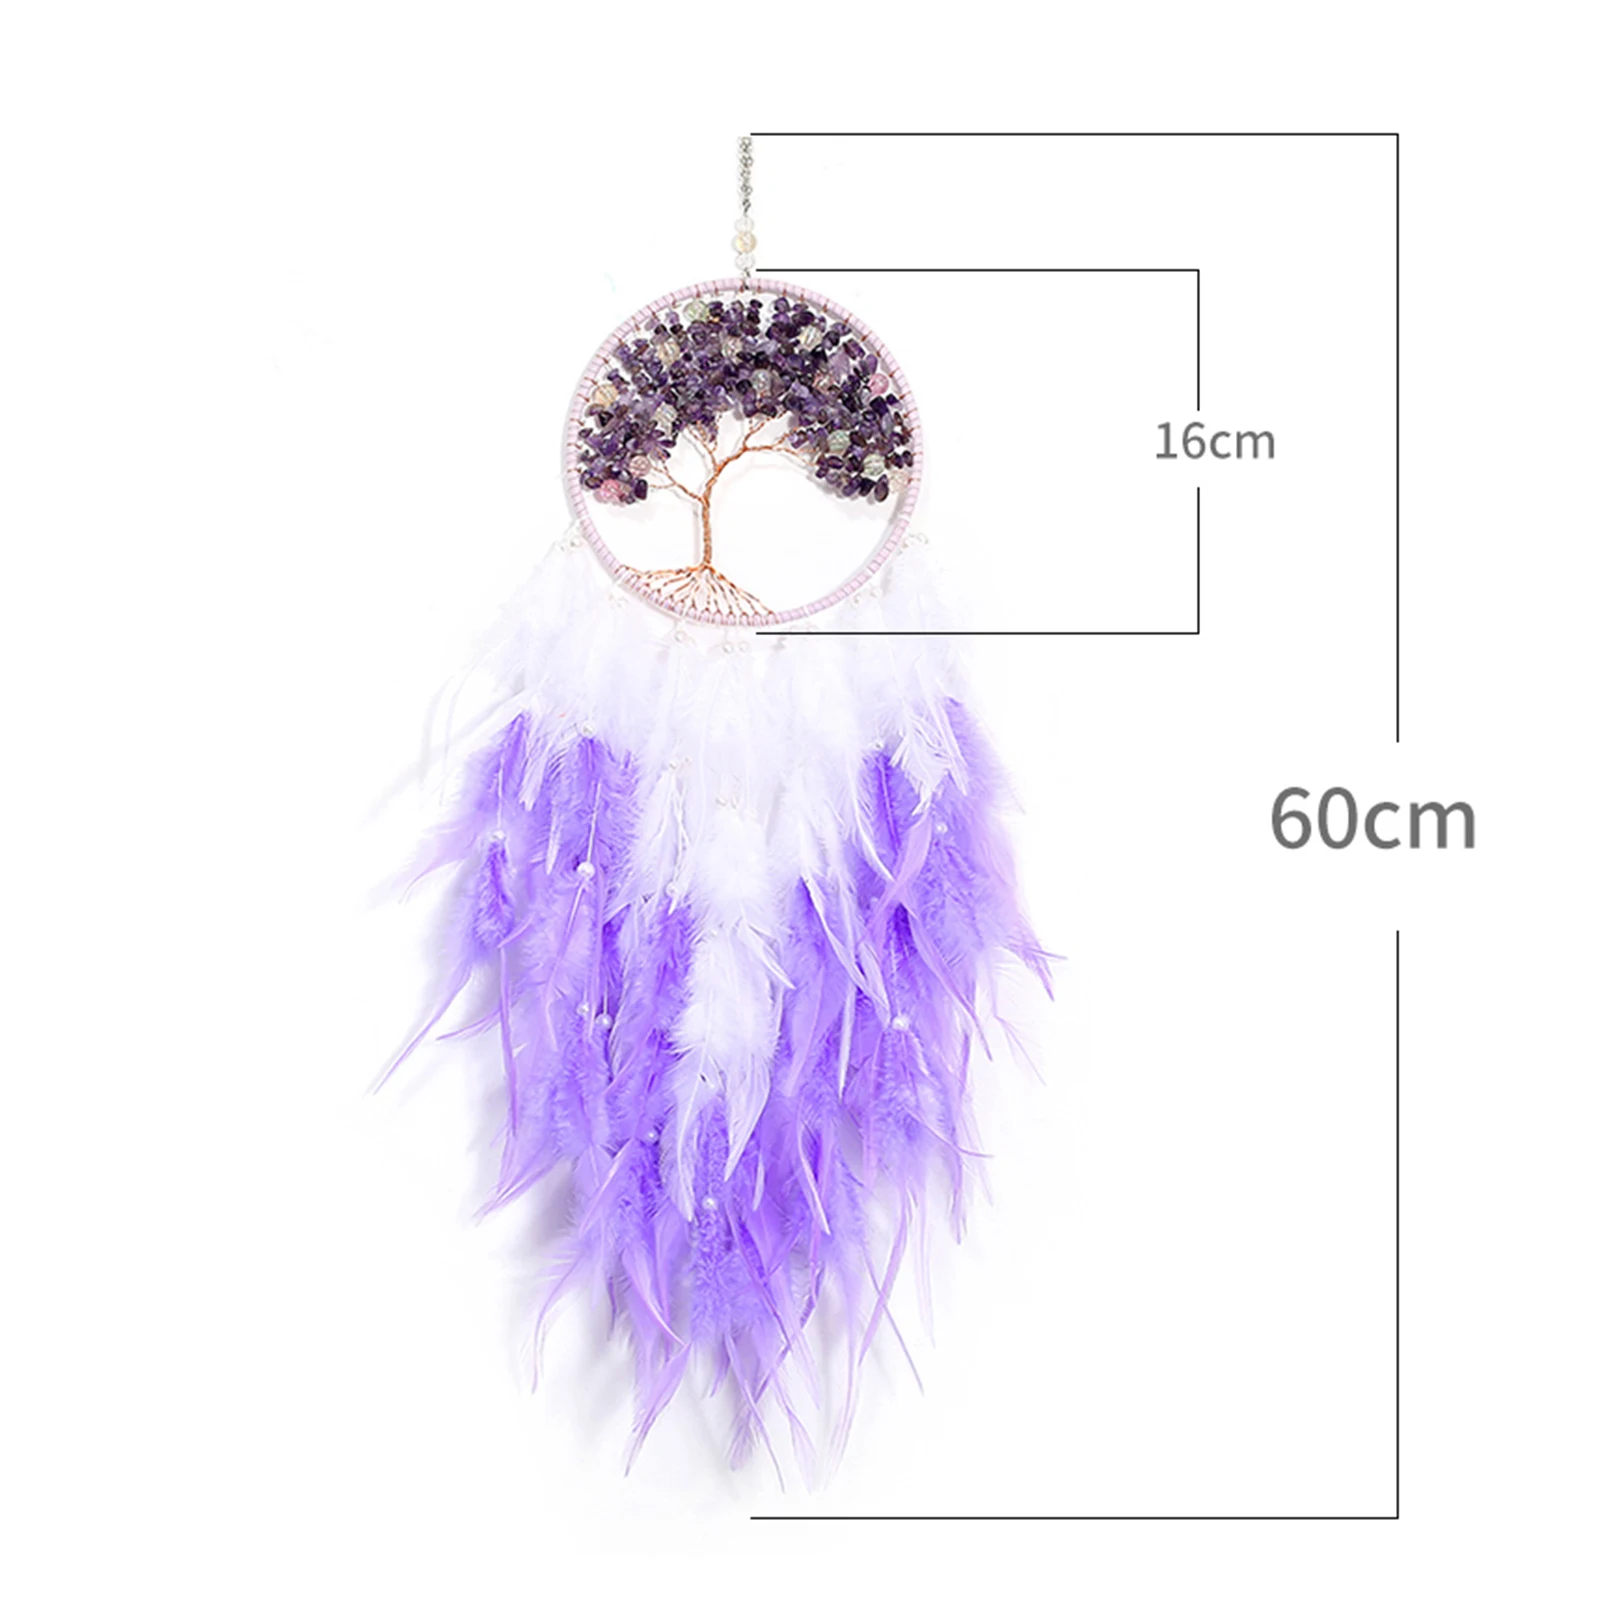 

LED Lamp Flying Wind Chimes Lighting Dream Catcher Handmade Gifts Dreamcatcher Feather Pendant Romantic Creative Wall Hanging